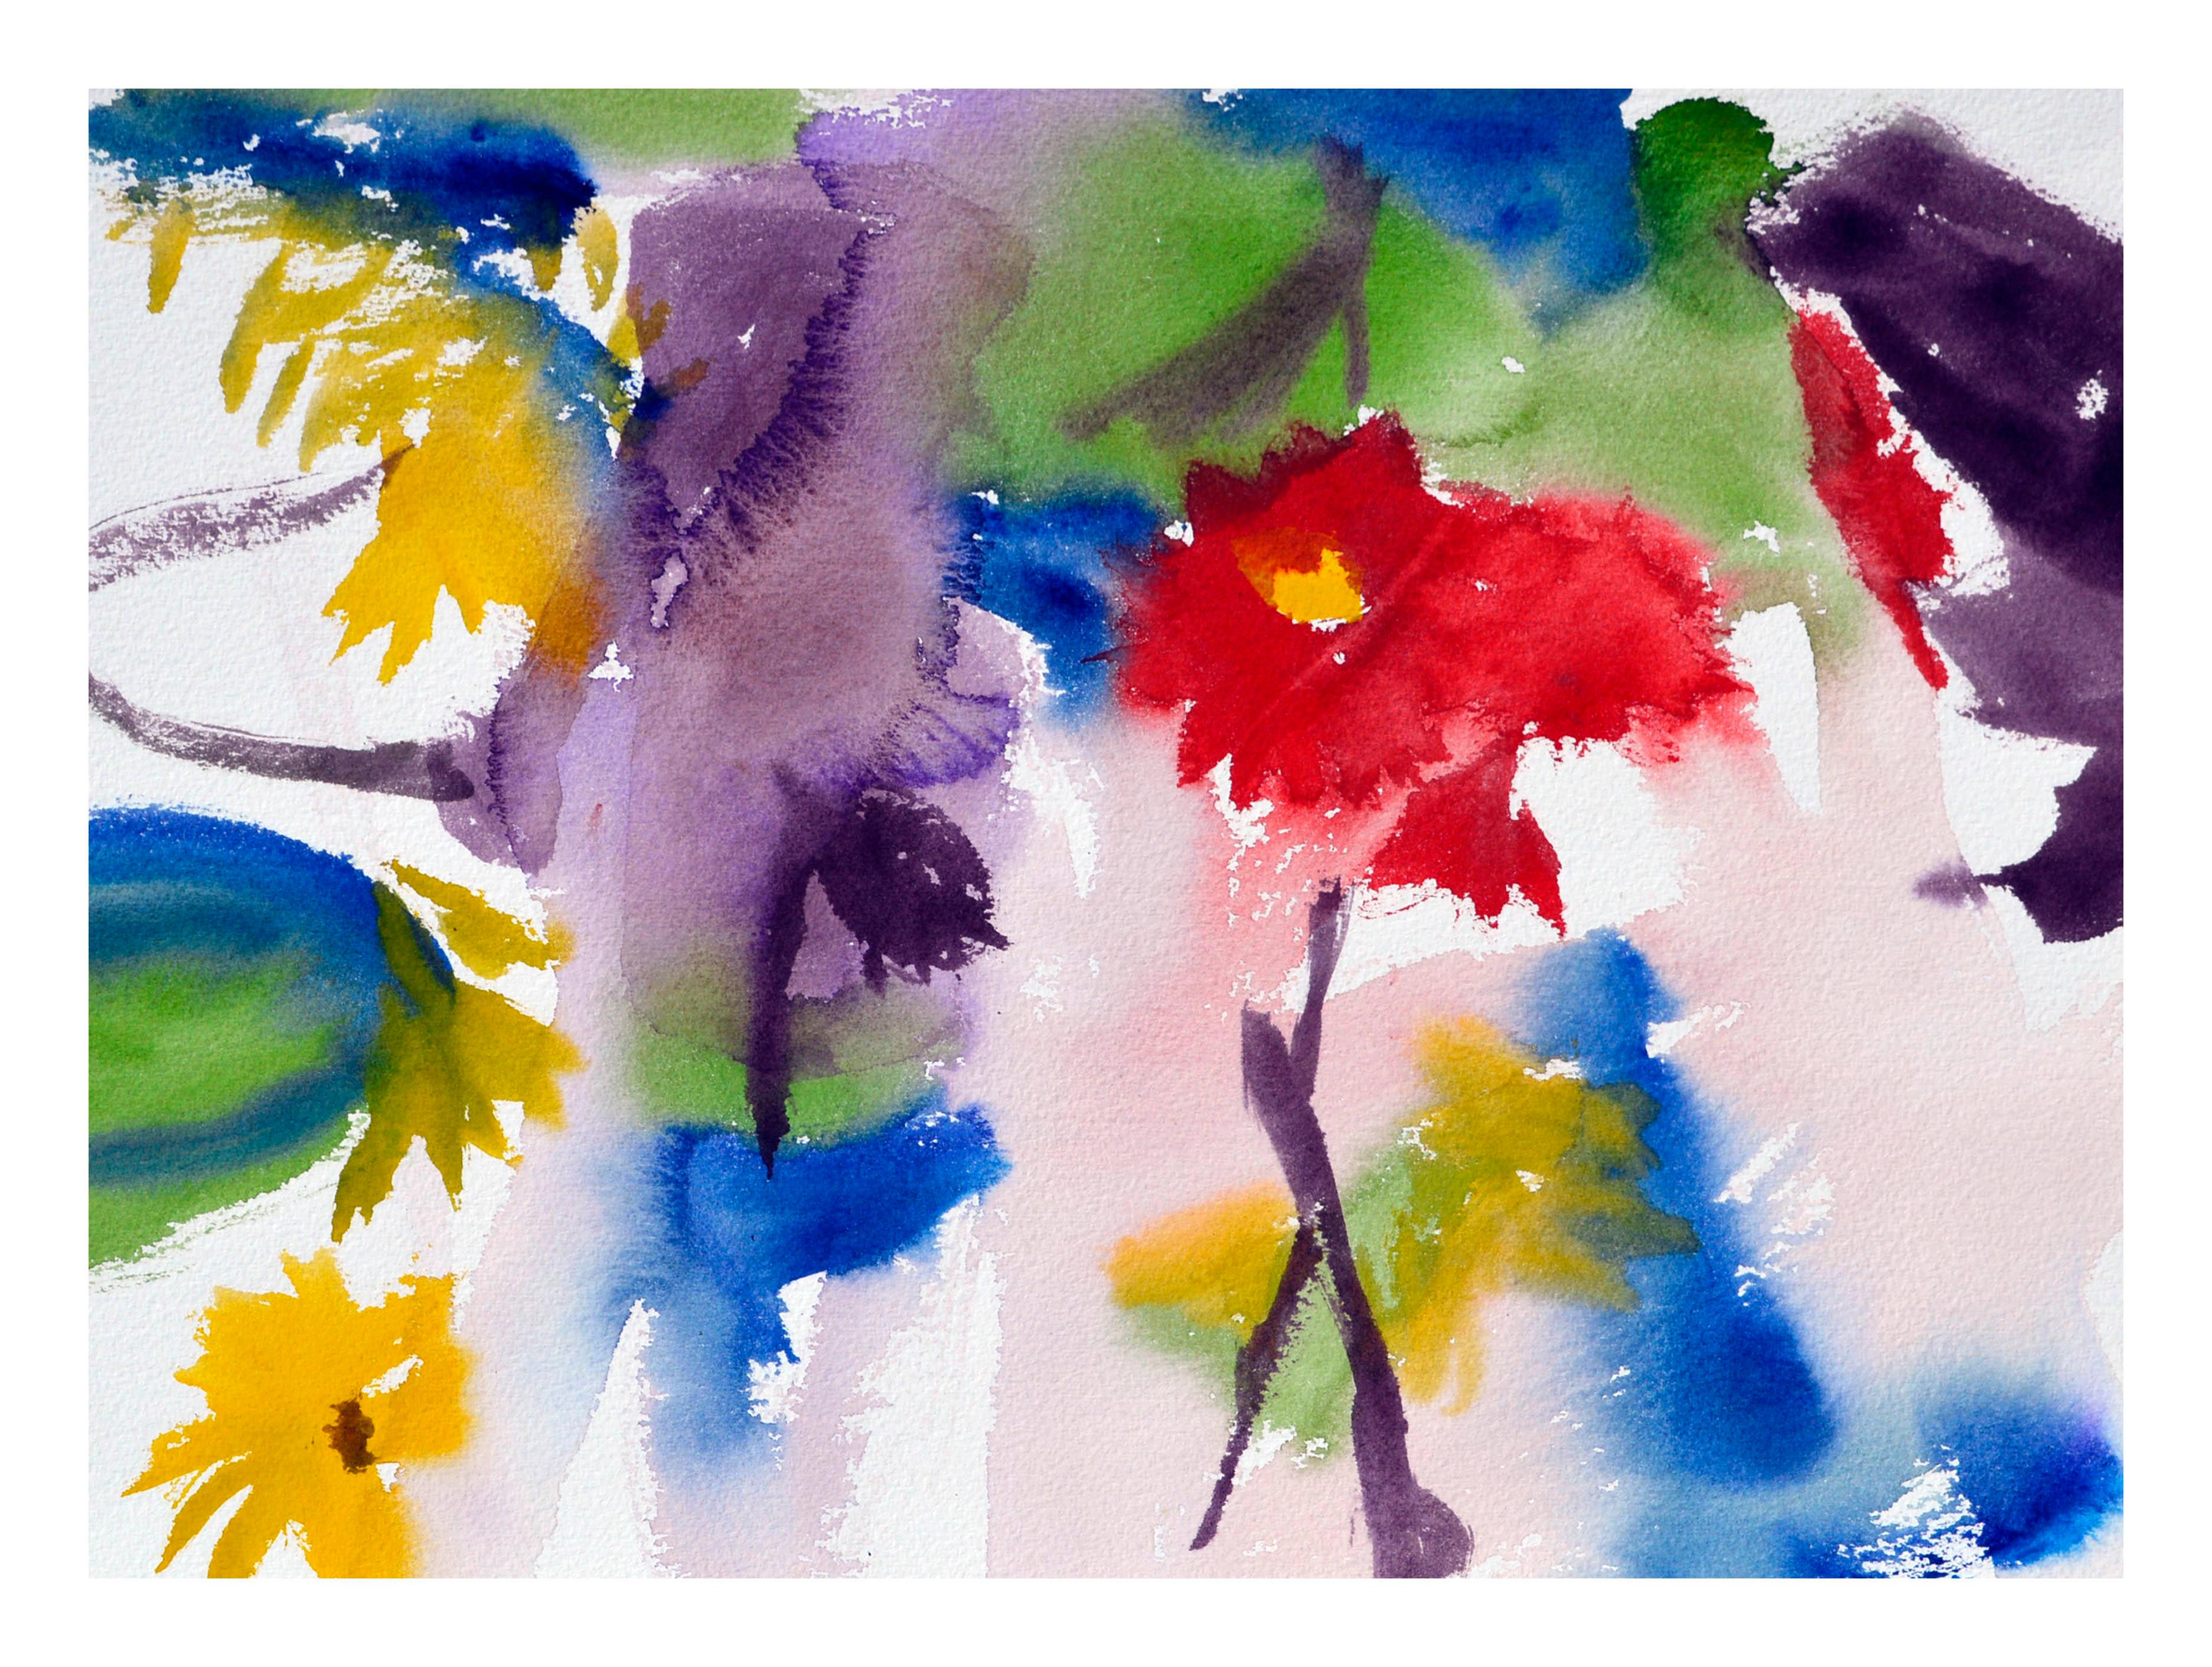 Abstract Flowers Watercolor - Art by Les Anderson